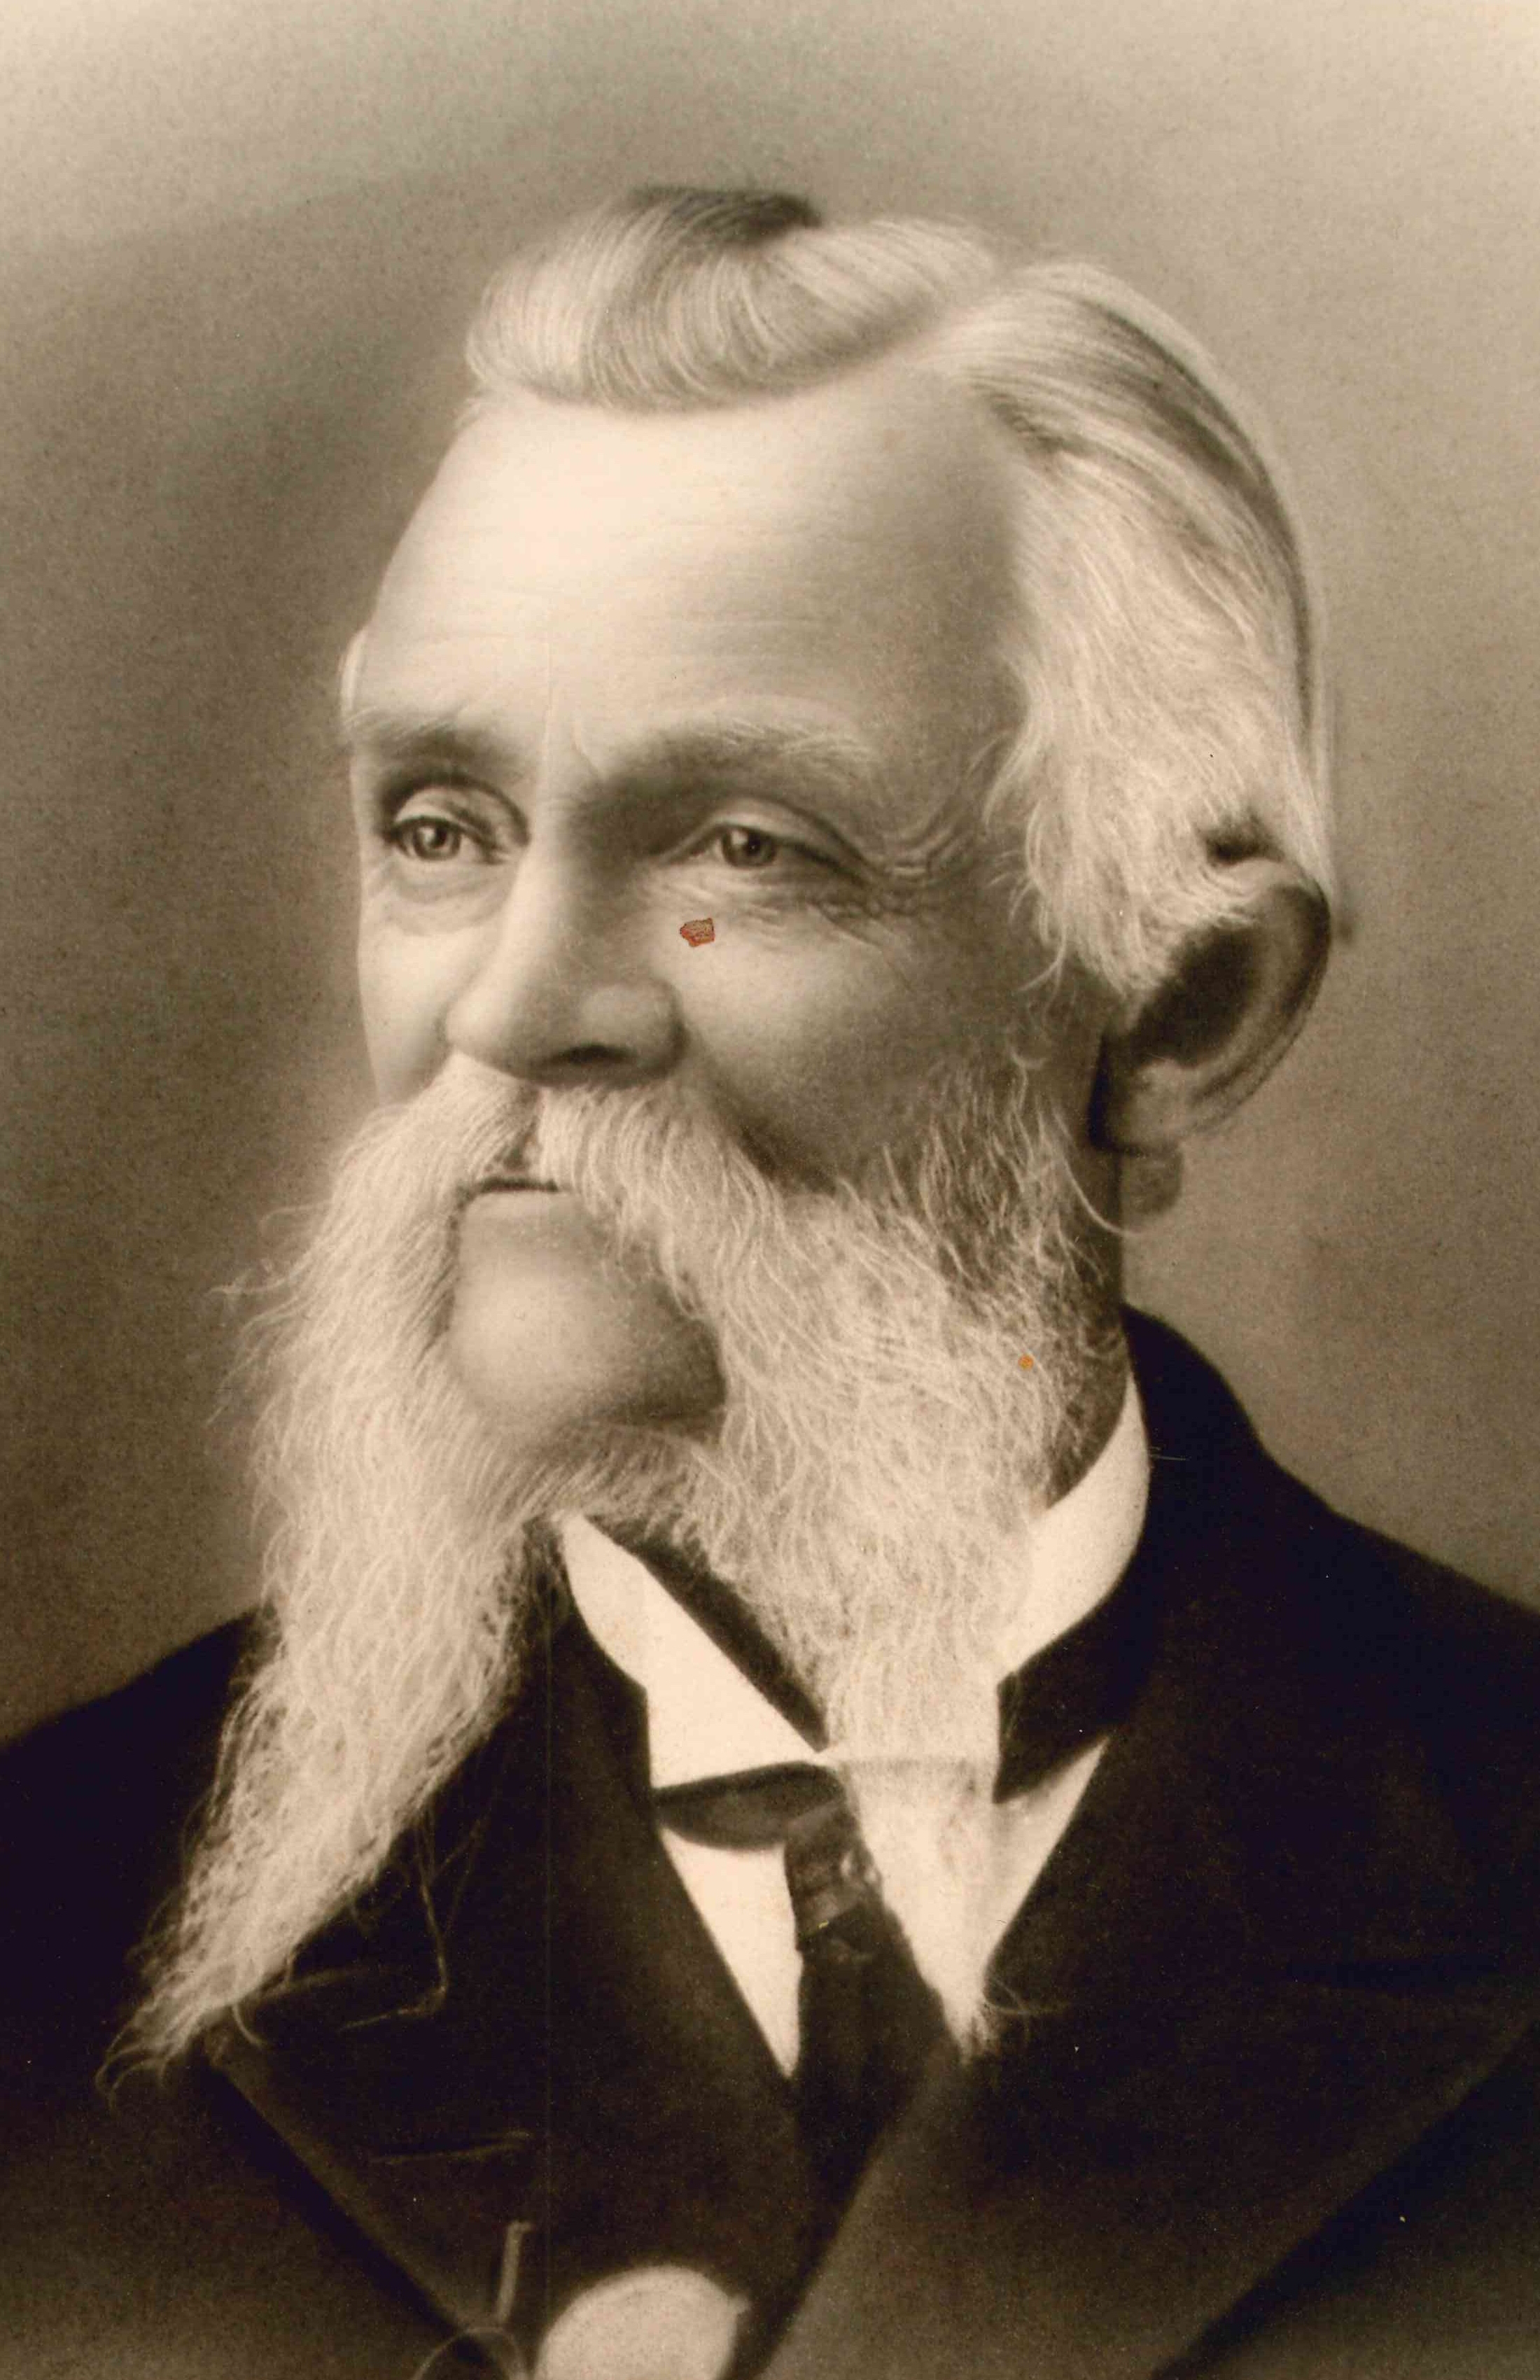 Rev. Plutarch S. Knight